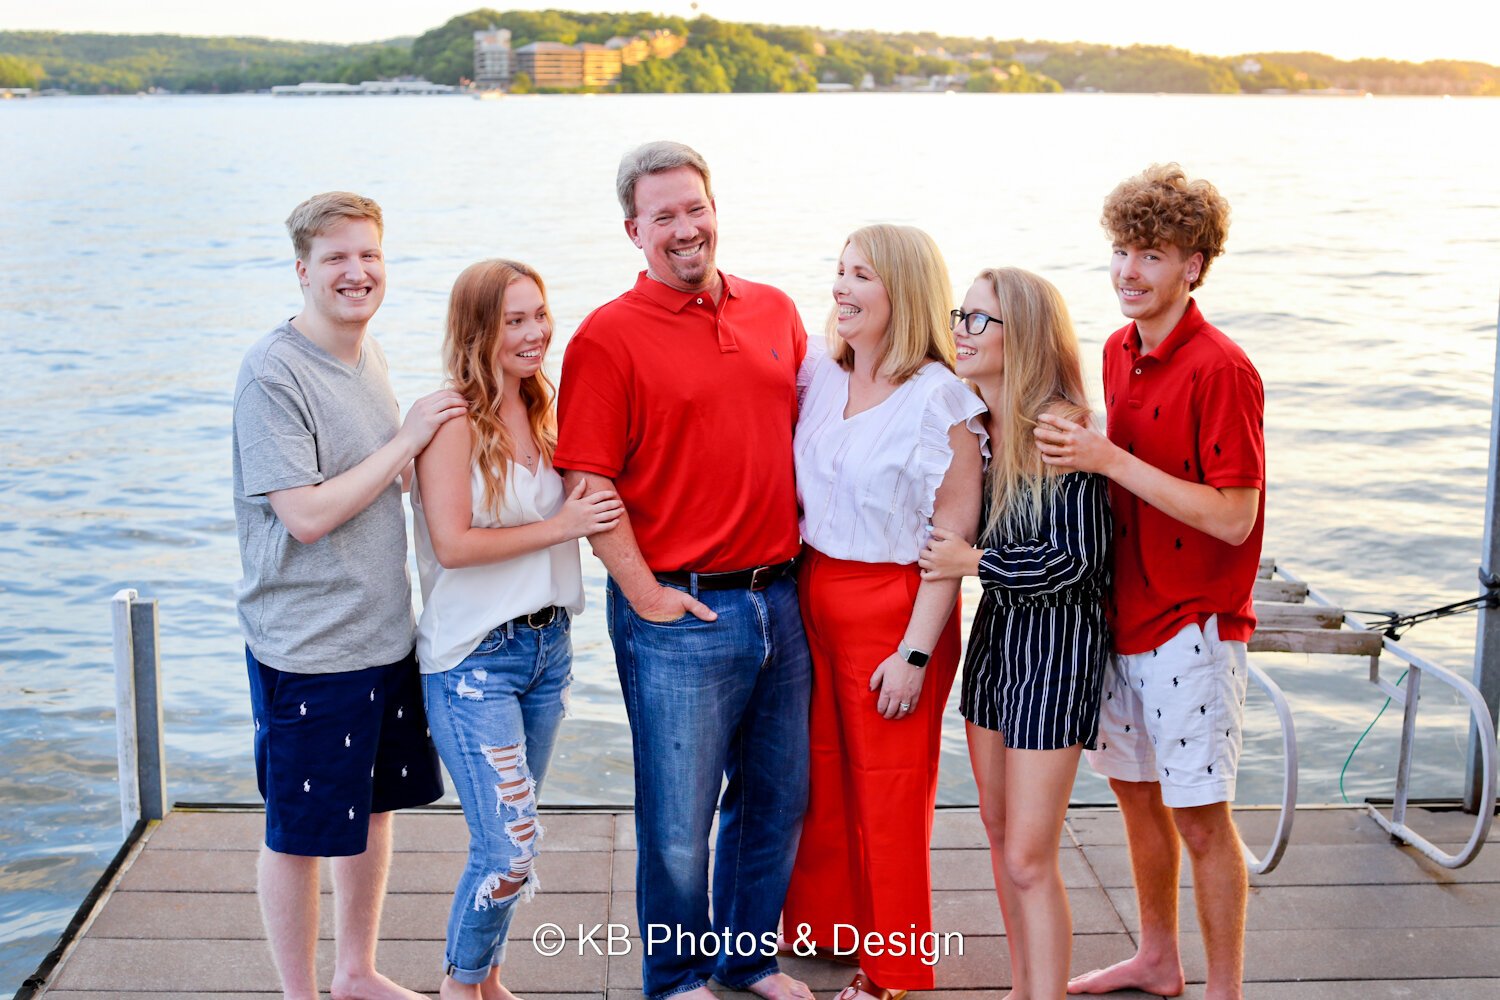 Family+Photography+Lake+of+the+Ozarks+Missouri+relaxed+sunset+dock+photos+KB+Photos+and+Design+(5).JPG